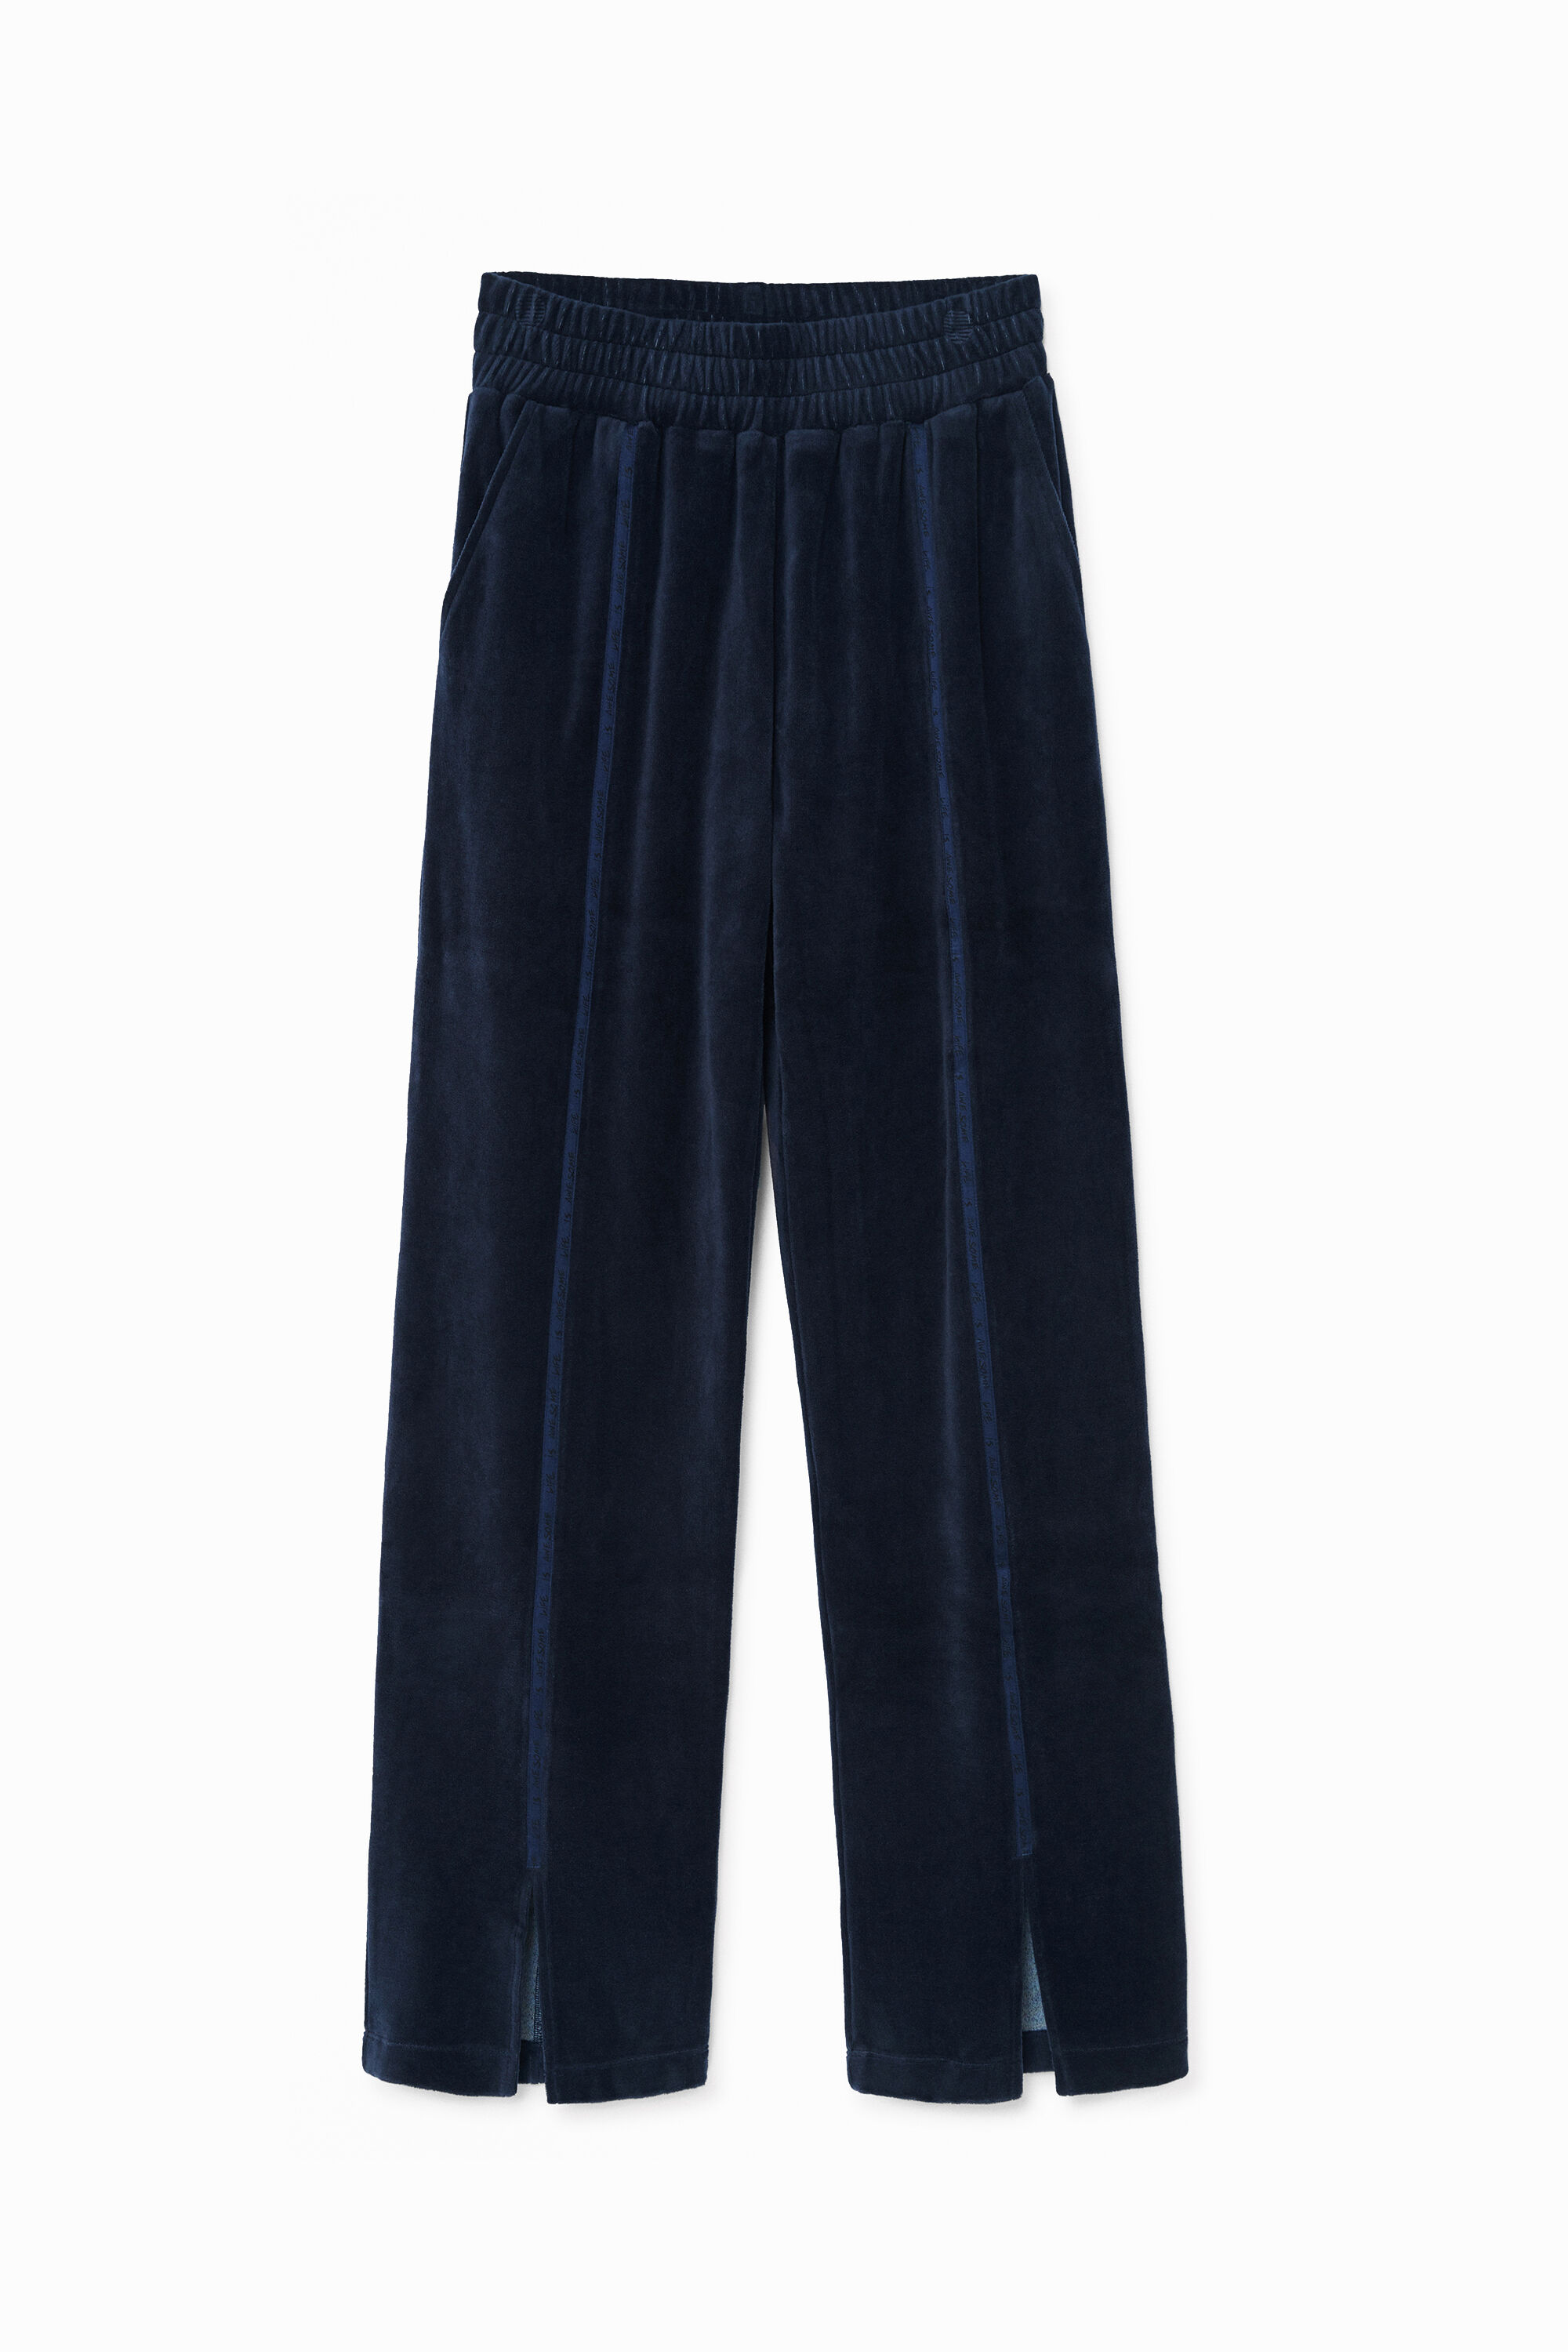 Plush wide trousers - BLUE - S